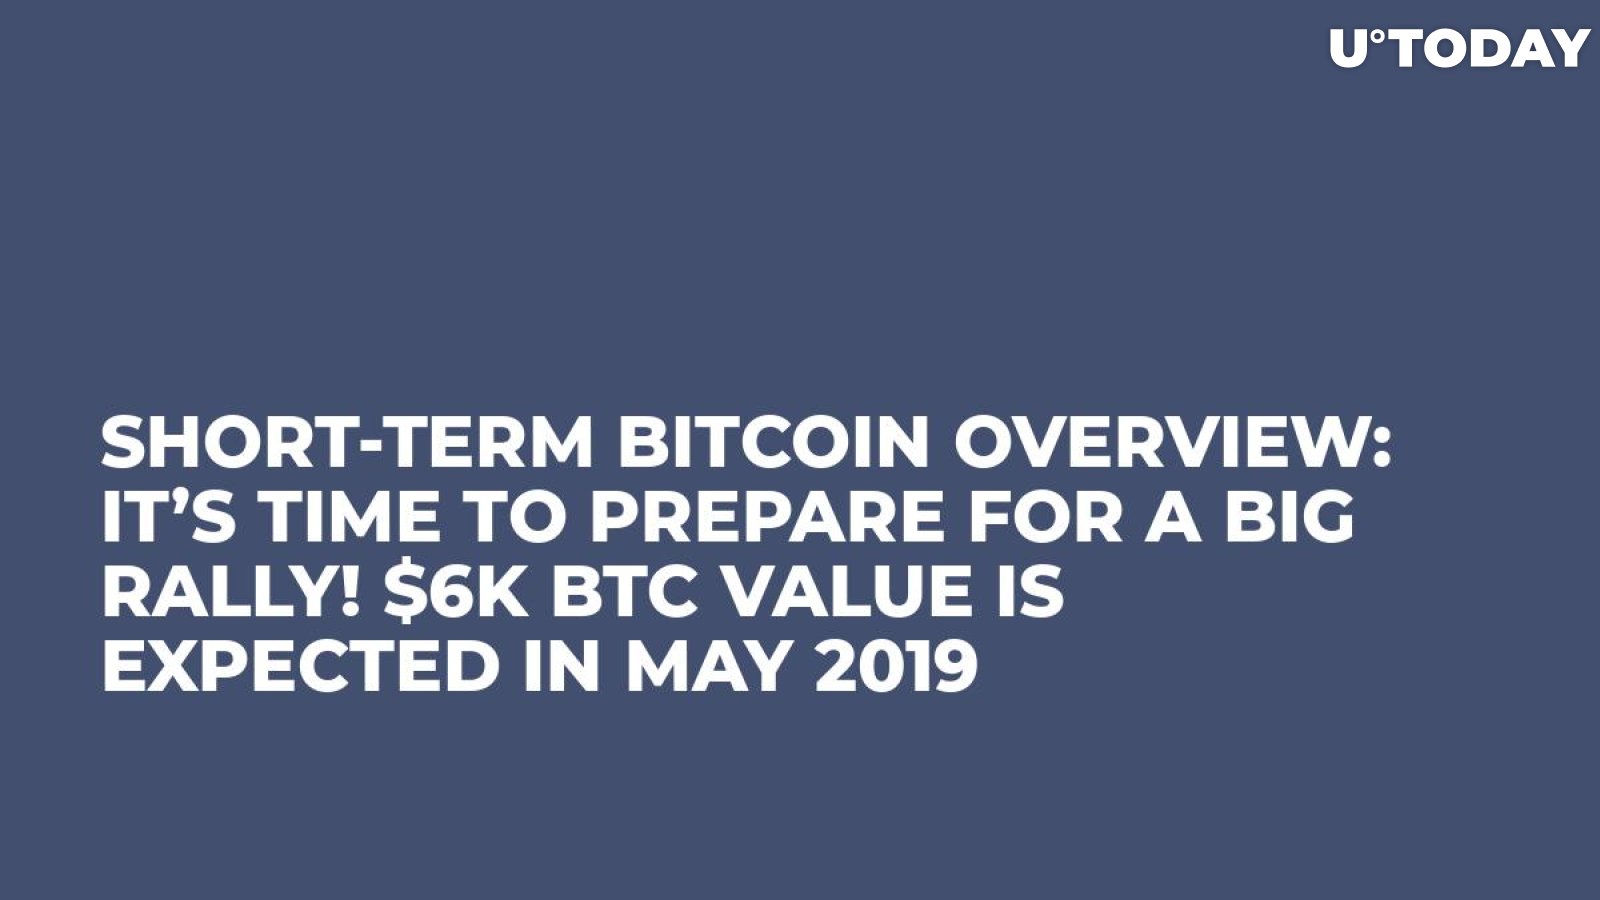 Short-Term Bitcoin Overview: It’s Time to Prepare for a Big Rally! $6K BTC Value Is Expected in May 2019